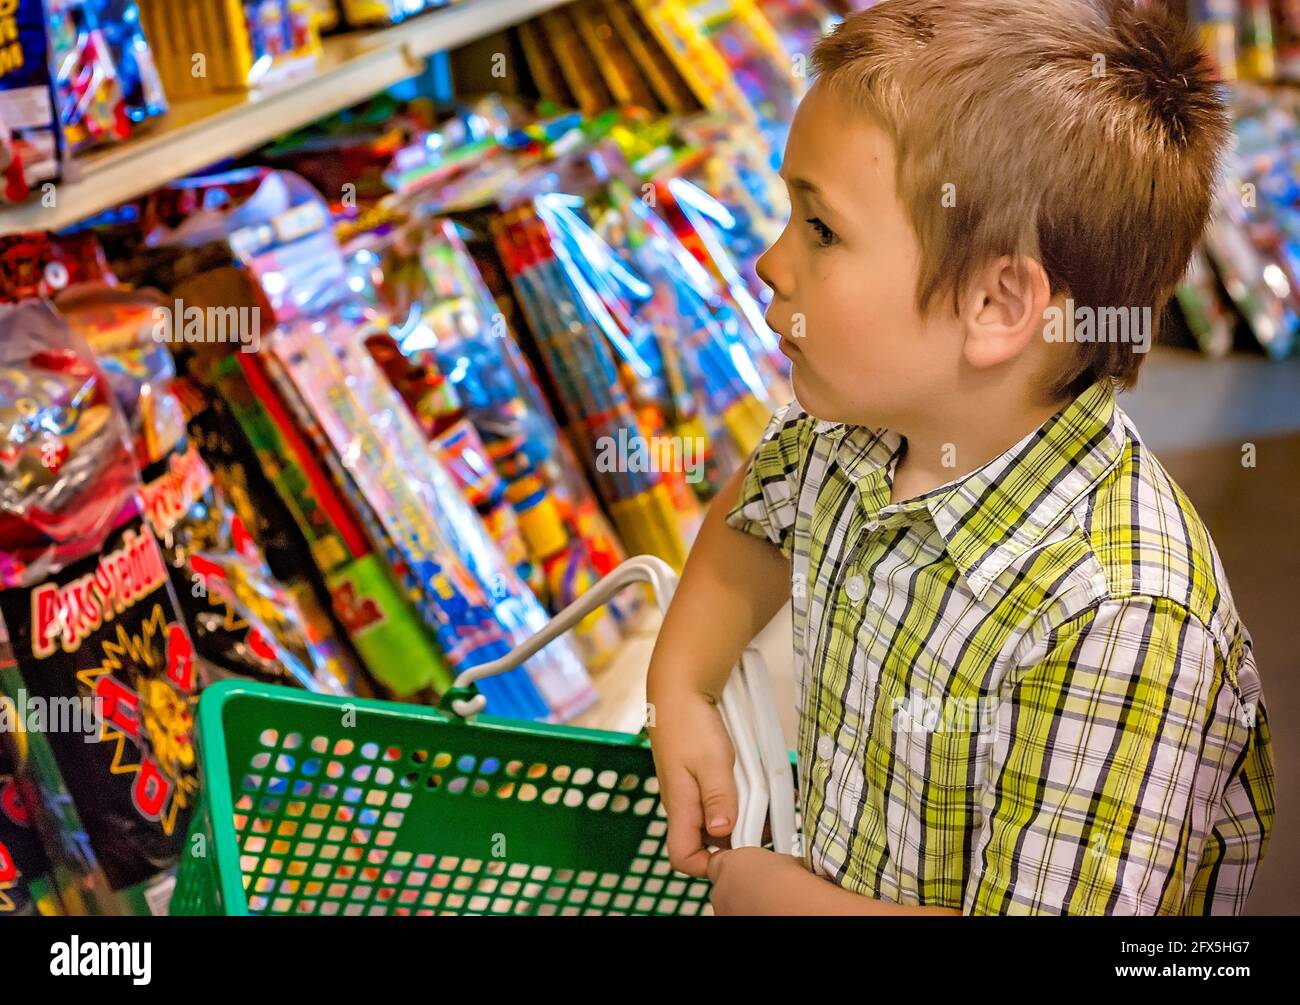 A boy shops for fireworks, July 1, 2011, in Columbus, Mississippi. Roadside fireworks stands are a popular sight in the American South. Stock Photo